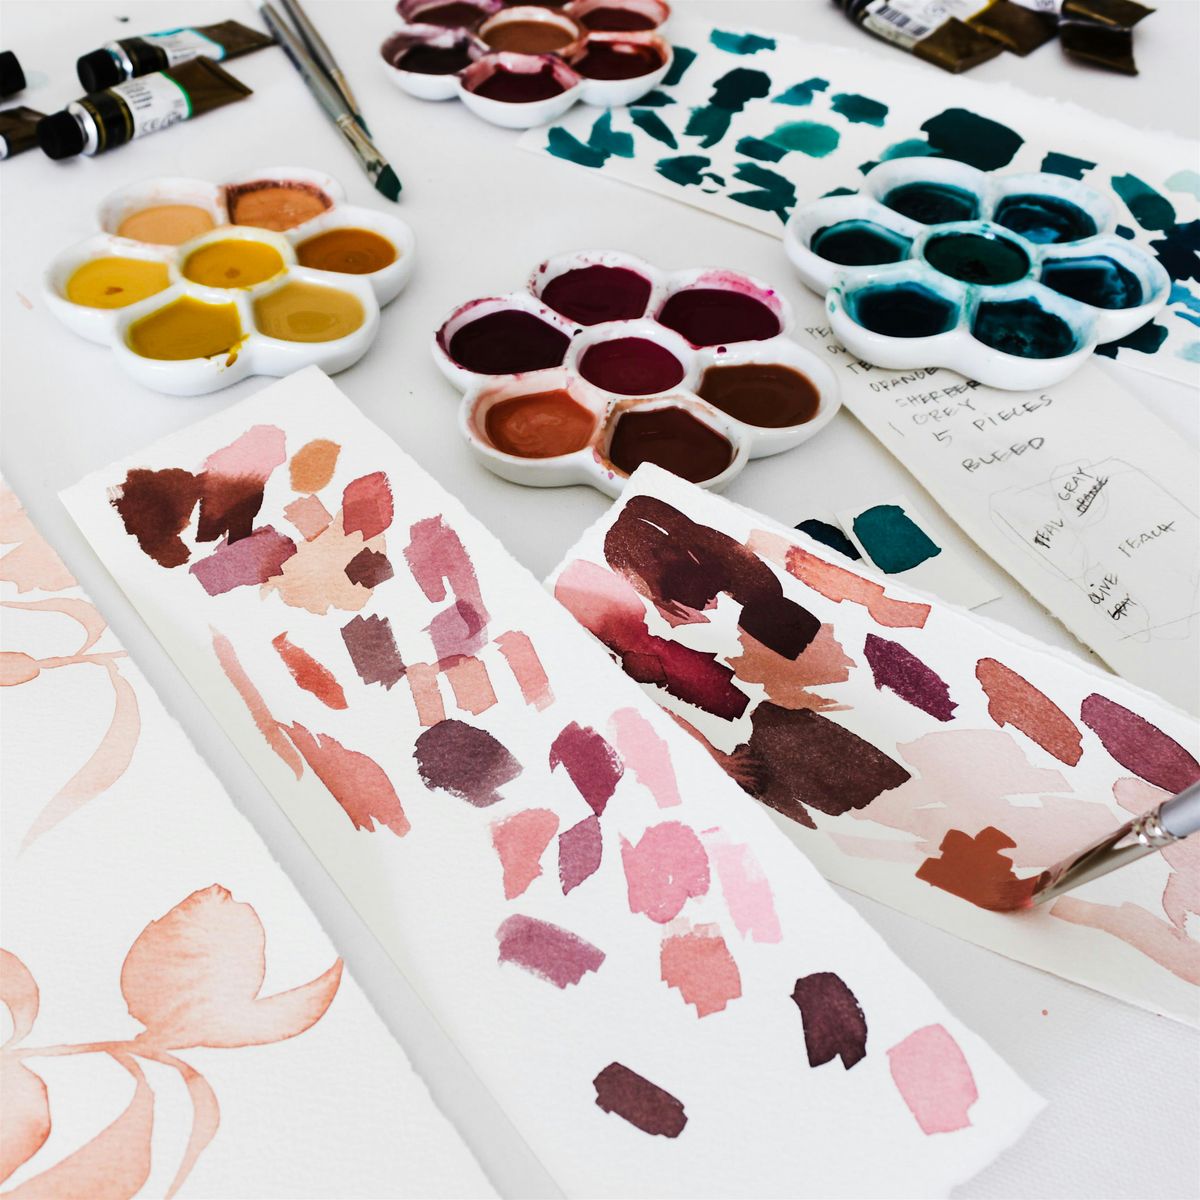 Workshop | Palette Harmony and Artful Mark-Making with Watercolor